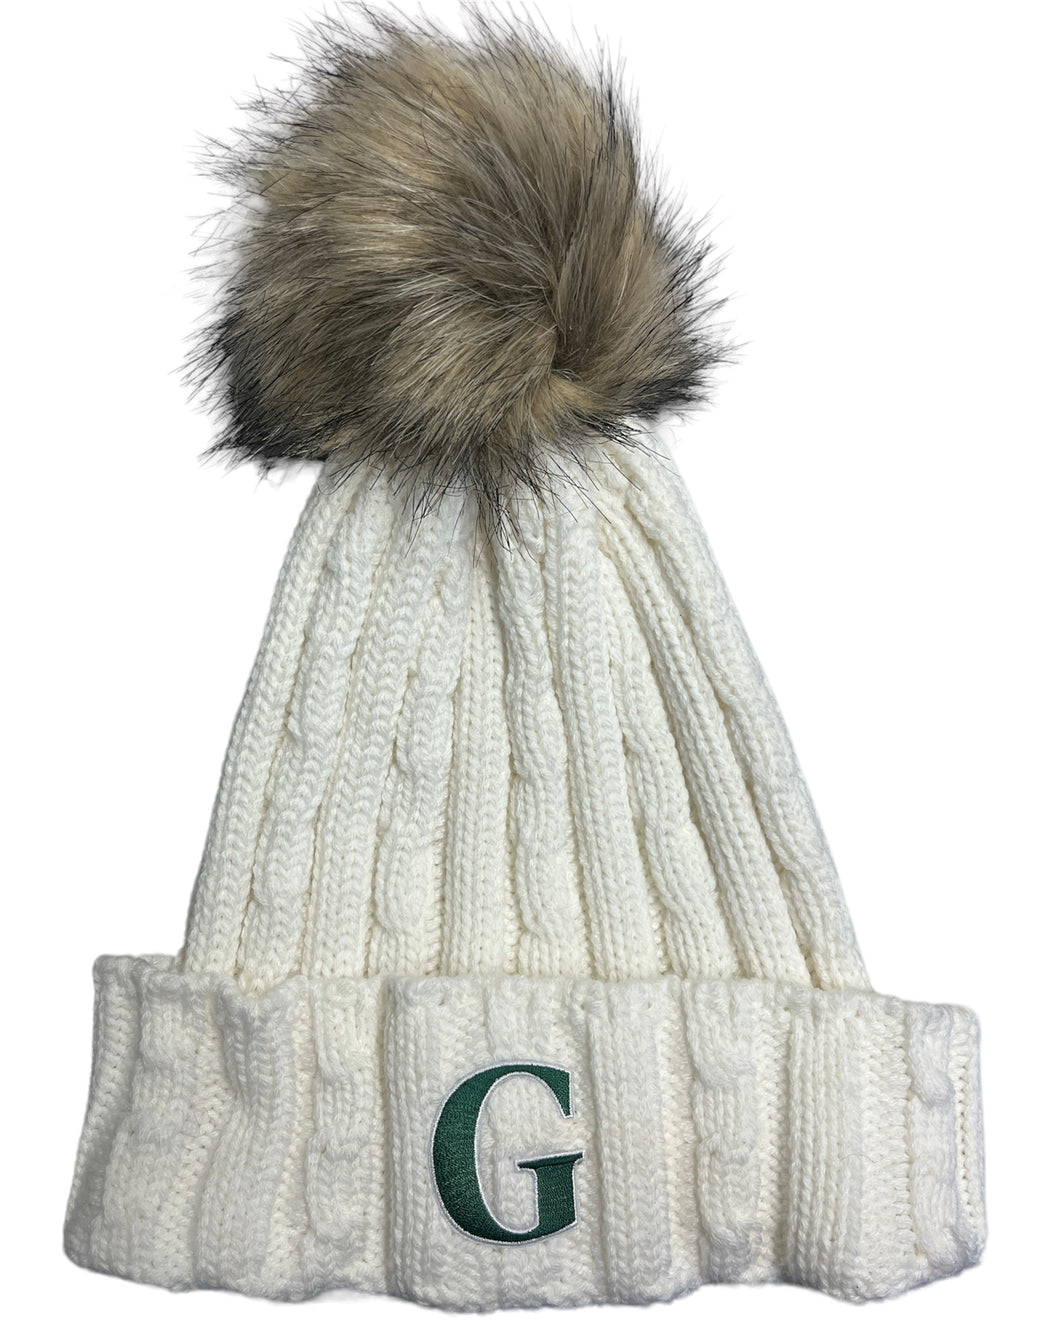 Greenhill Logofit Pom Cable Knit Beanie